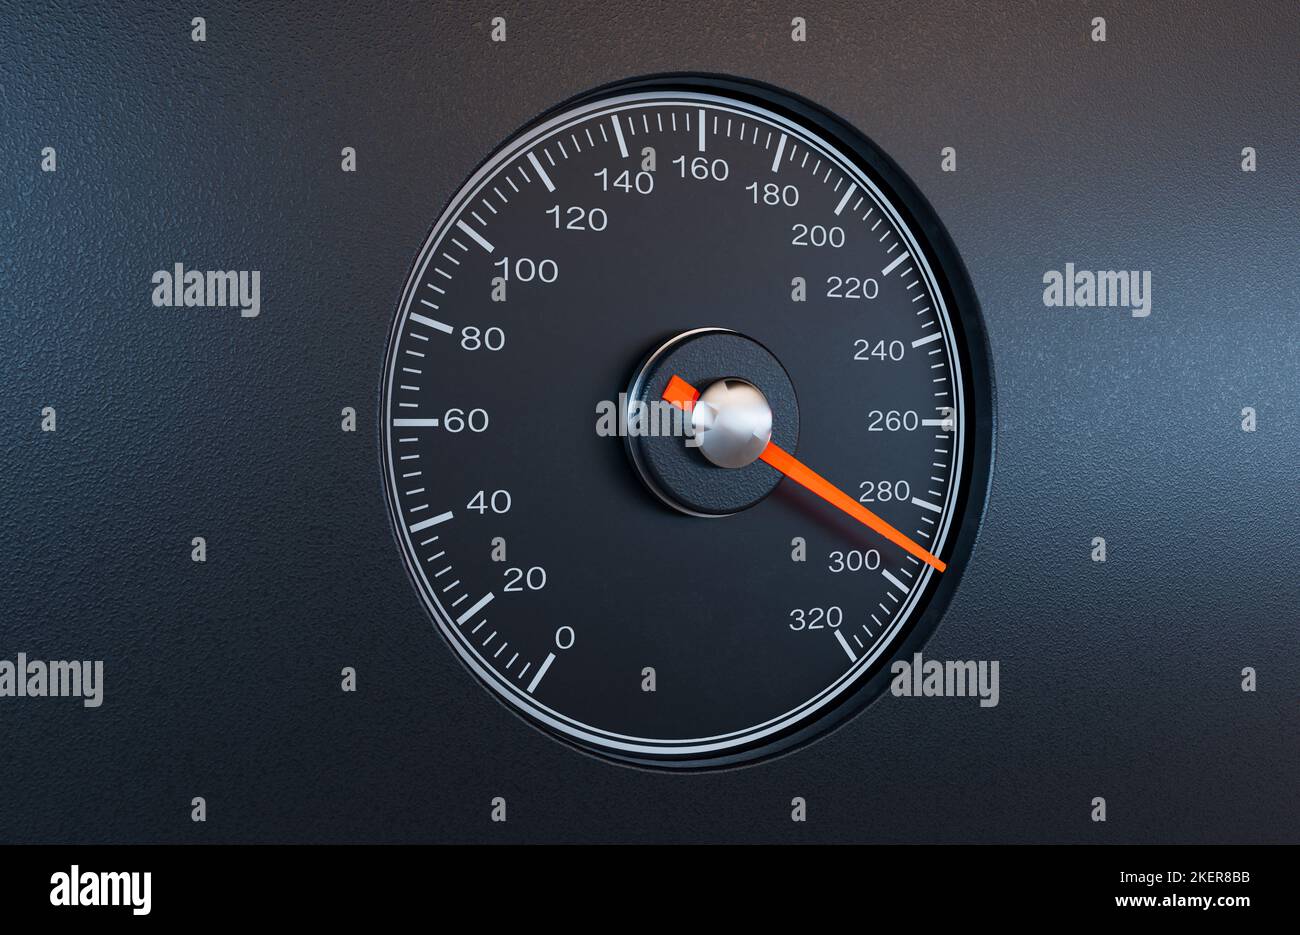 A regular car speedometer with an orange needle pointing towards a high speed on an isolated black background - 3D render Stock Photo